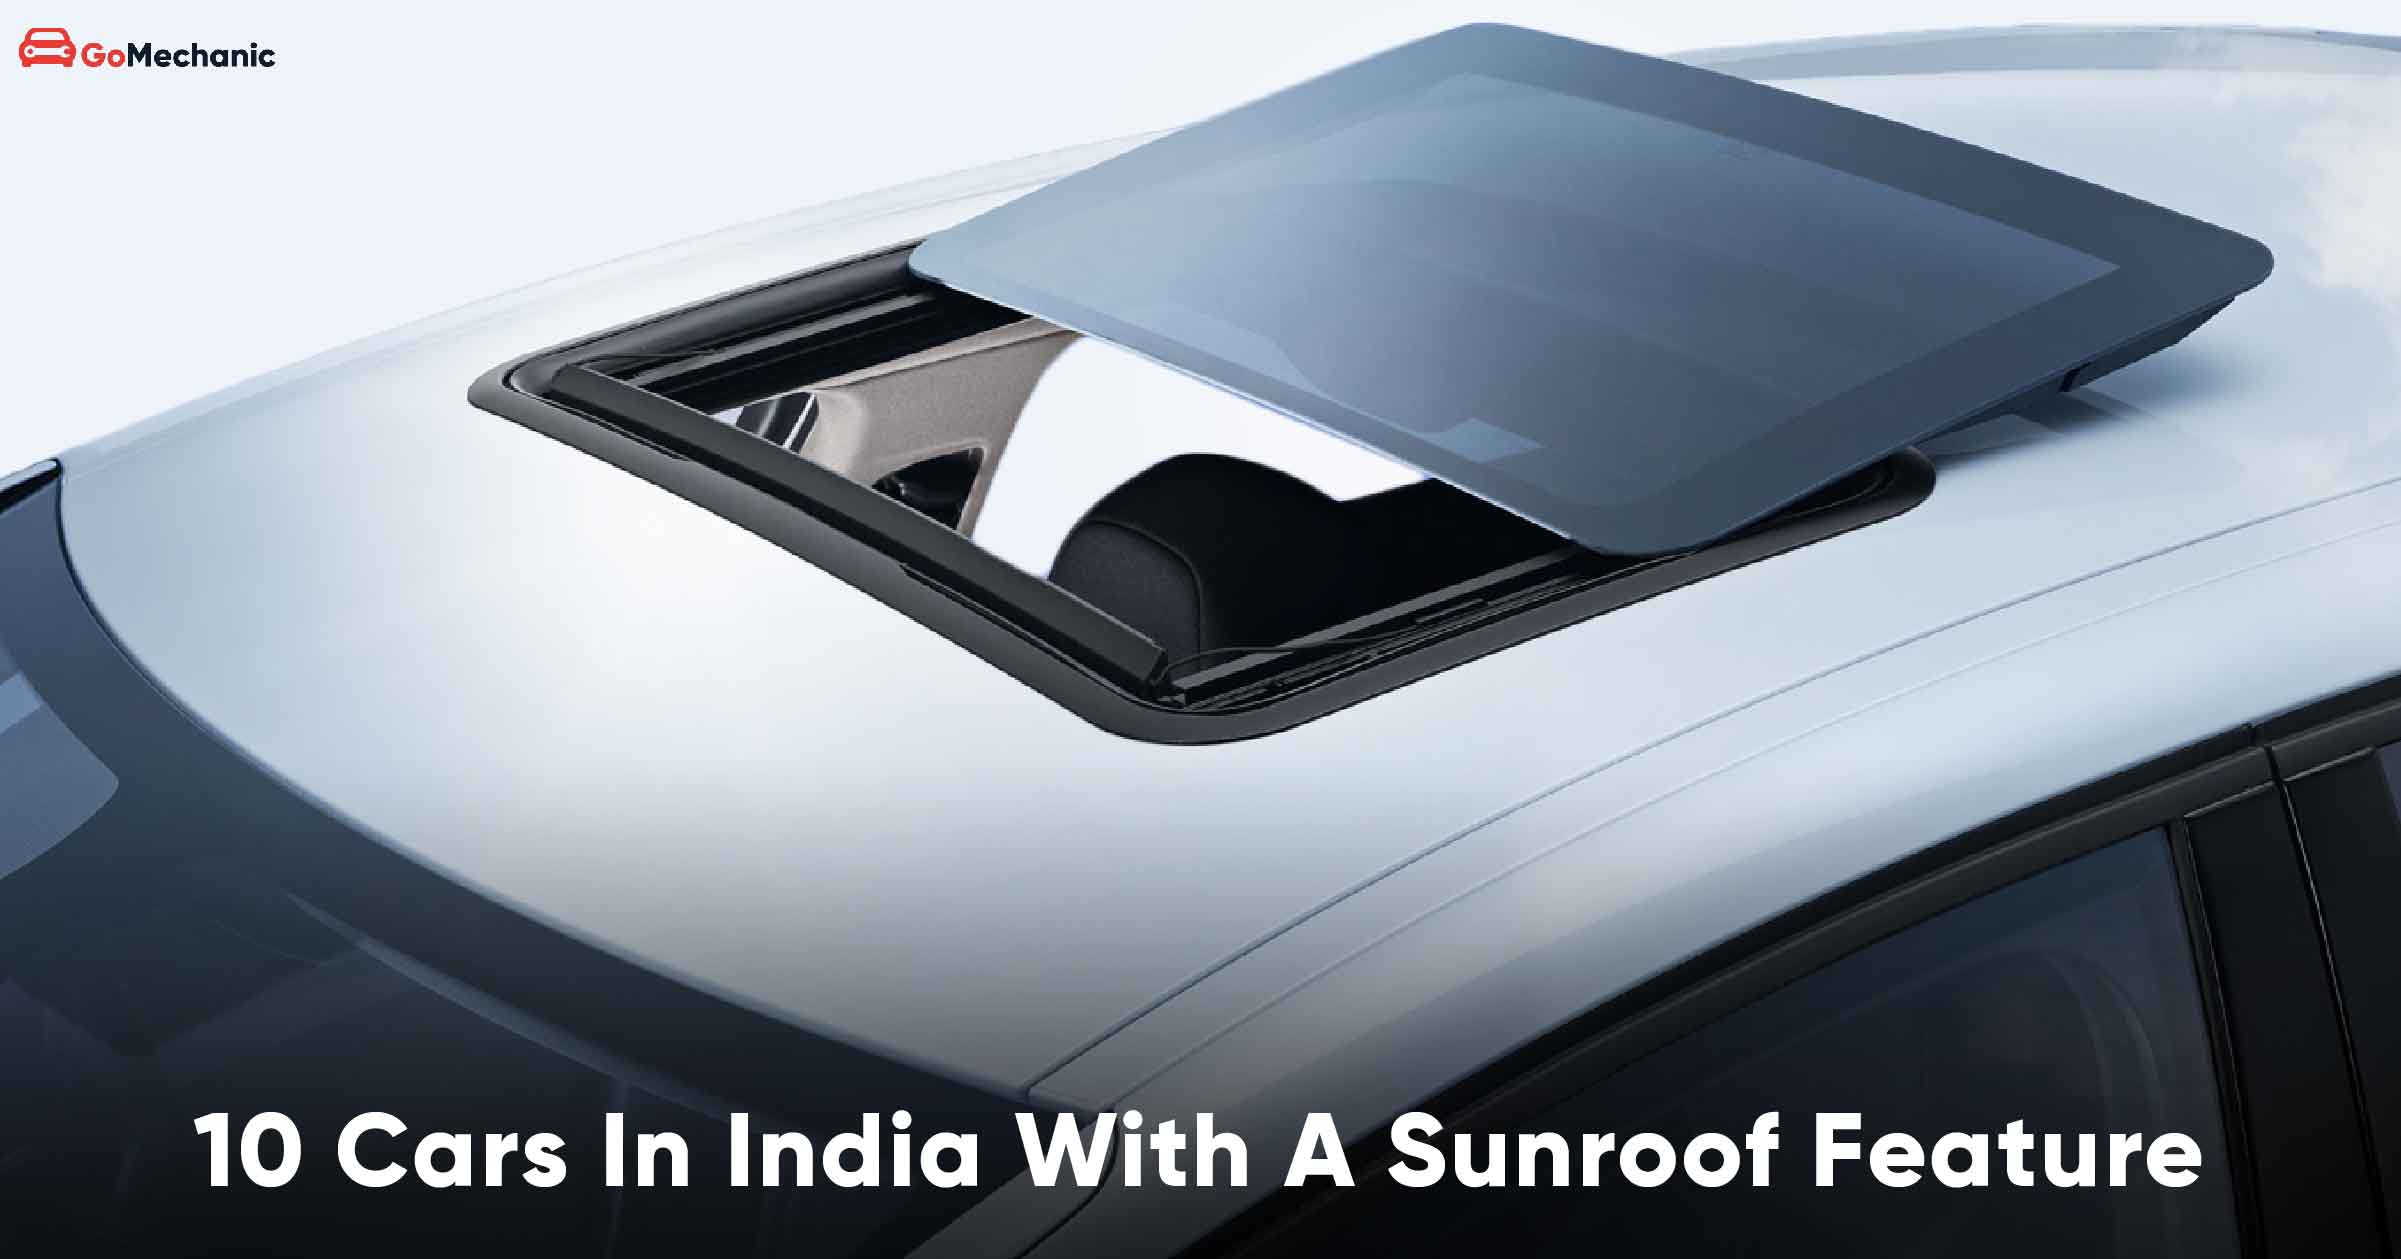 10 Cars In India with a Sunroof Feature